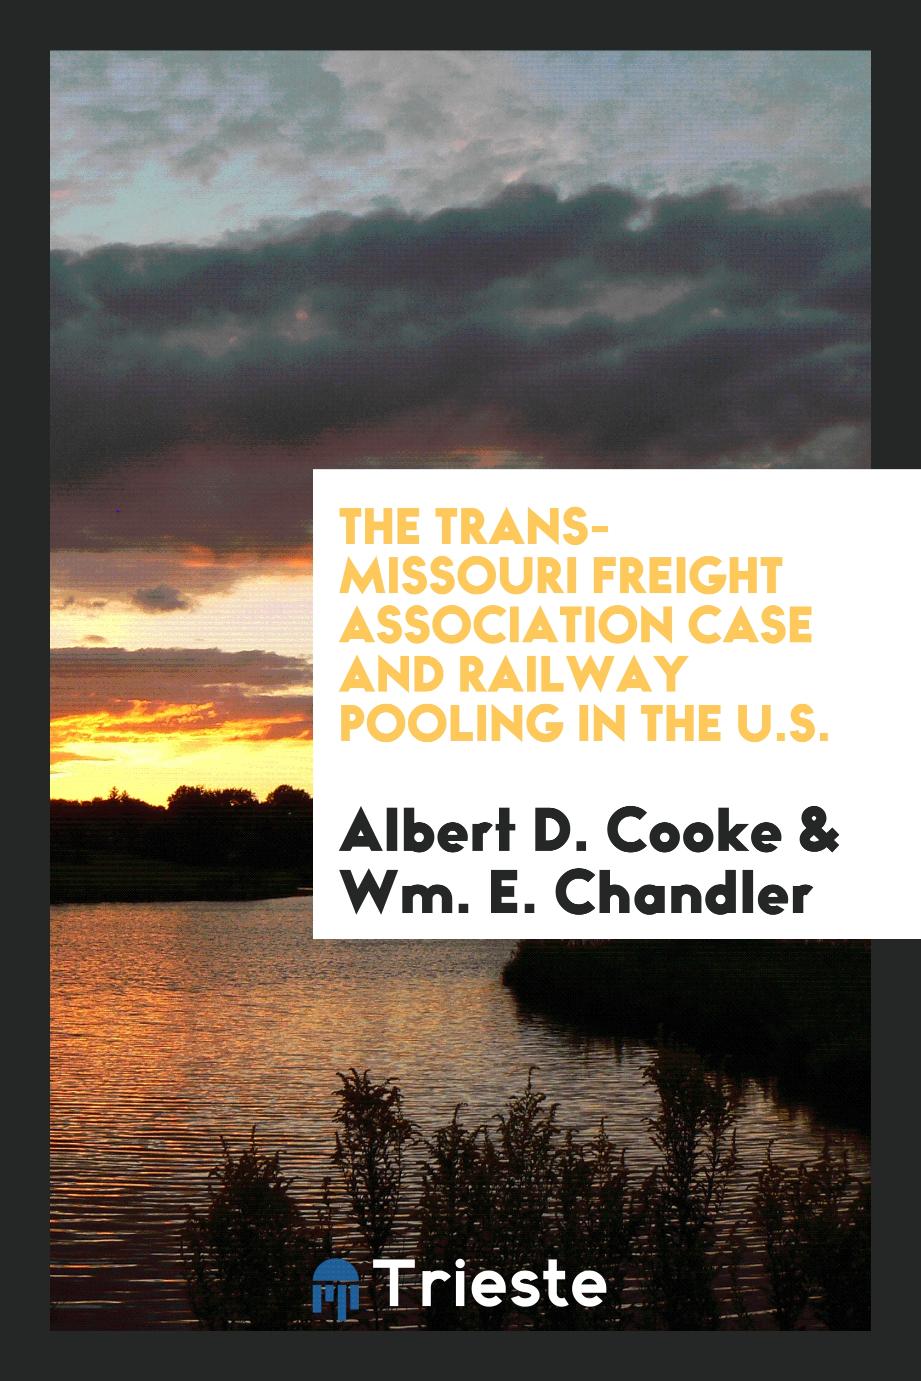 The Trans-Missouri freight association case and railway pooling in the U.S.